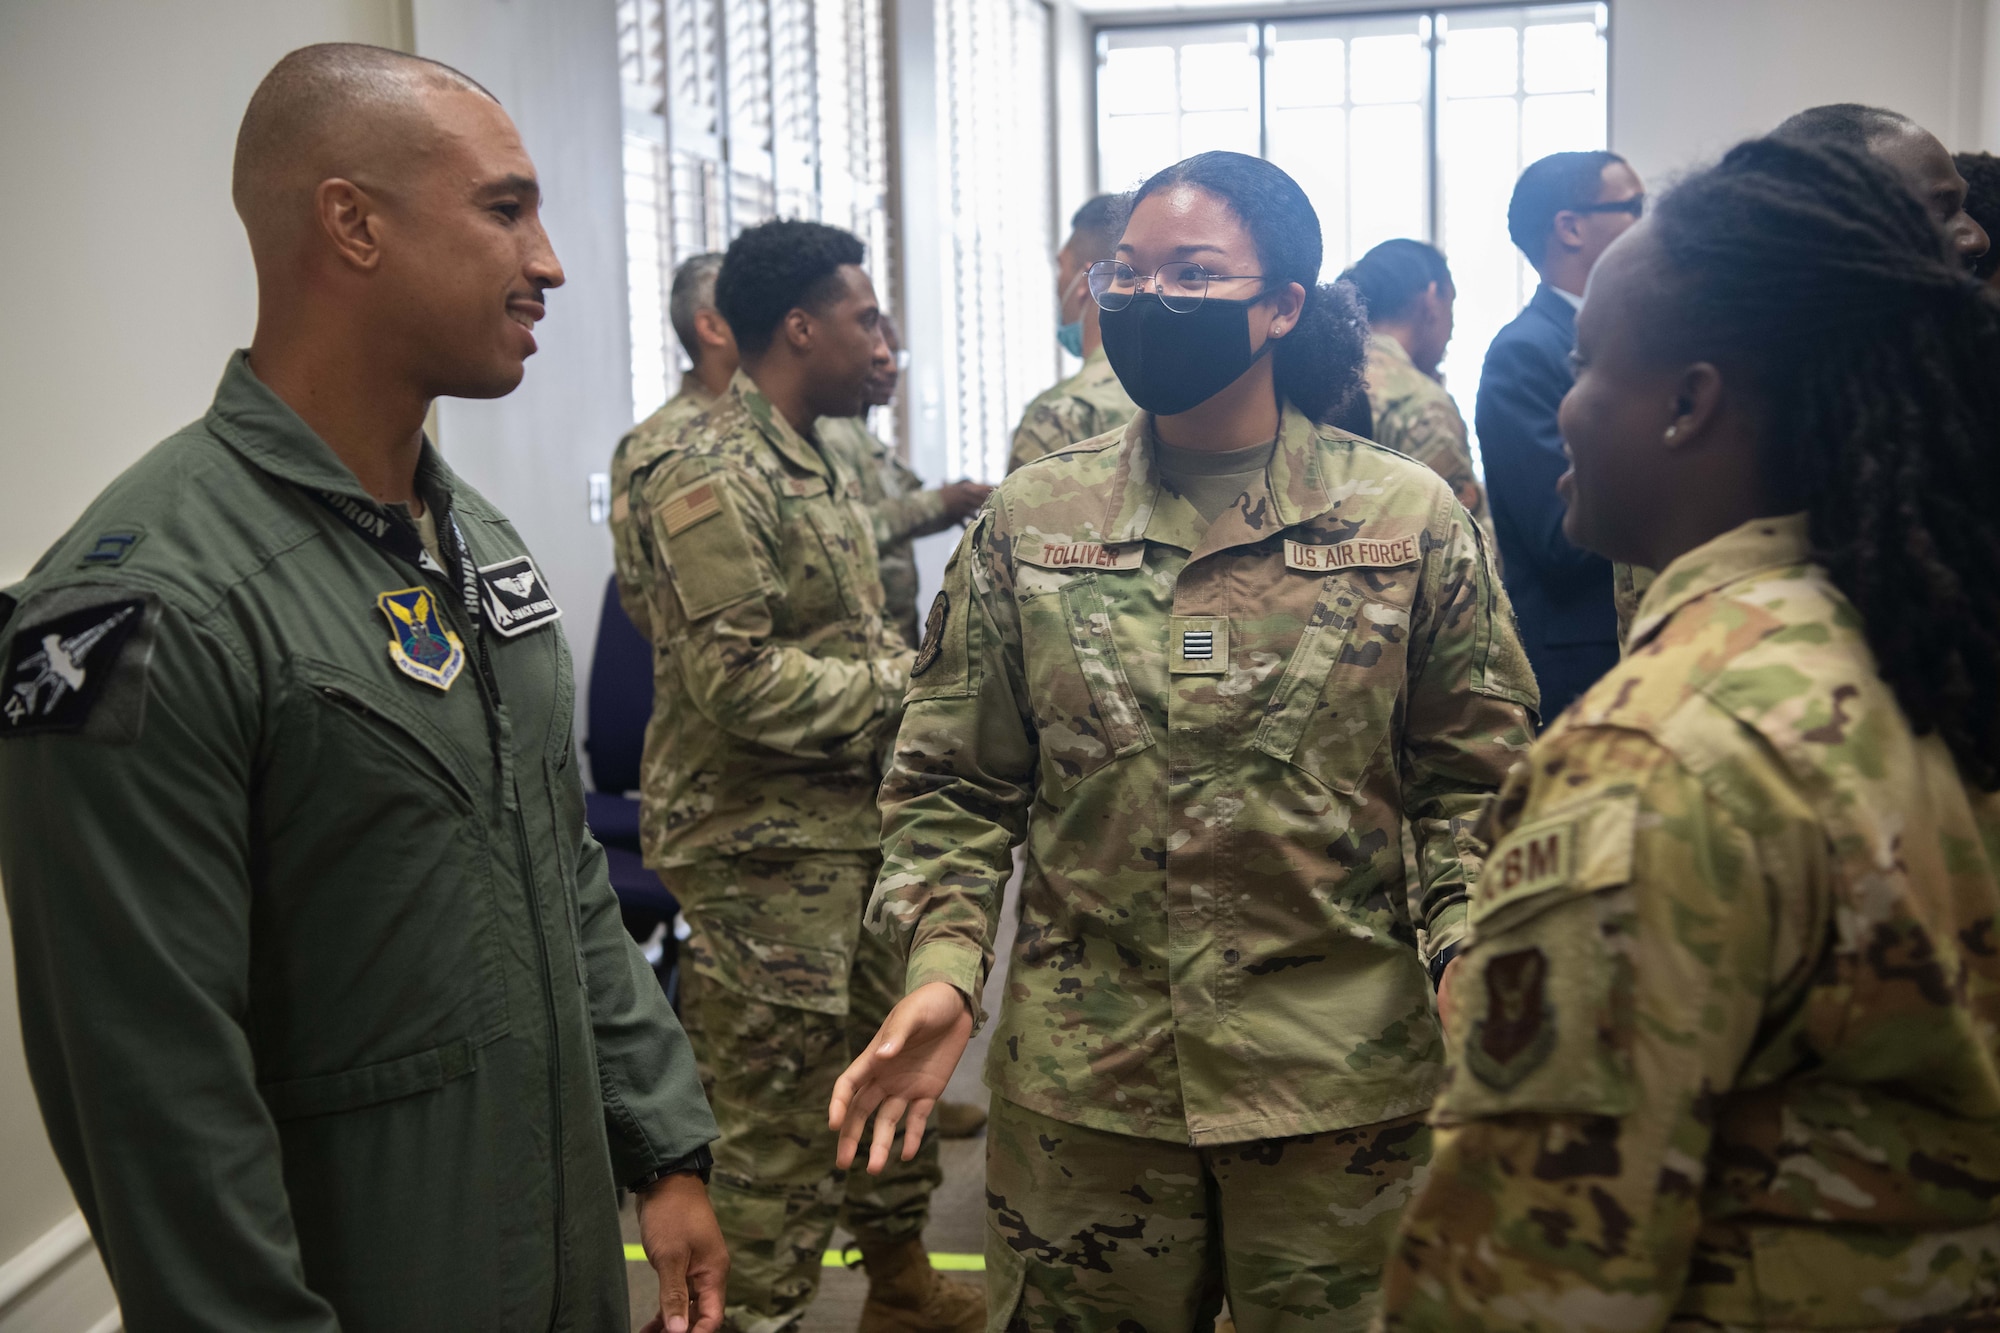 Capt. Malcom Skinner, B-1B bomber weapons system officer, Dyess Air Force Base, Texas, talks with Air Force ROTC cadets at the Historically Black Colleges and Universities mentorship session held Aug. 31, 2022, in conjunction with the Department of the Air Force IT and Cyberpower Conference. The session included several total force and retired Air Force officers and about 40 ROTC and junior ROTC cadets.